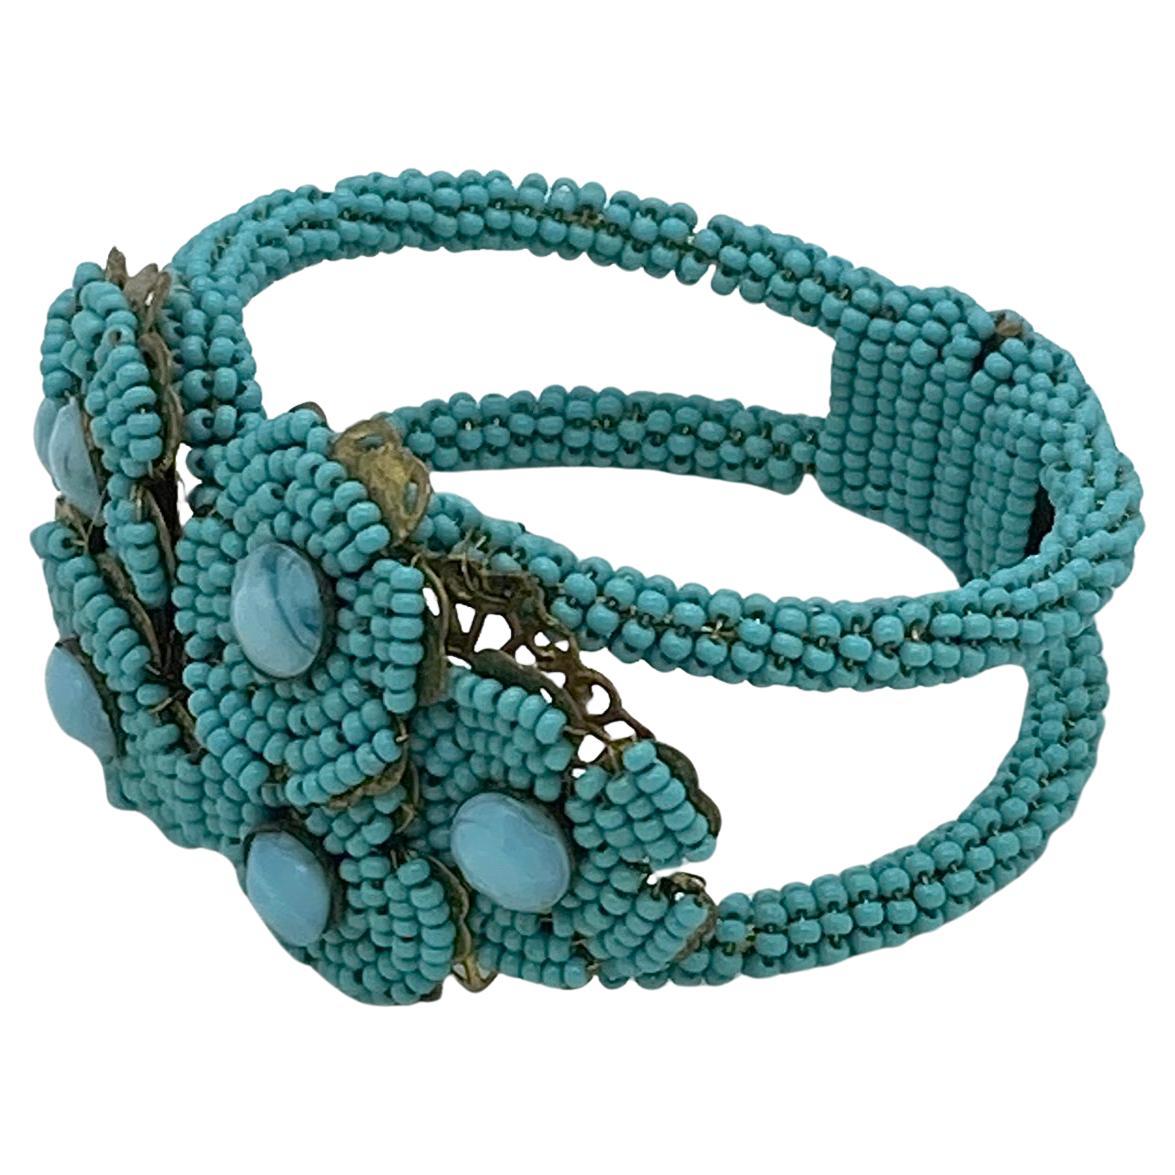 This is a Stanley Hagler Style hinge clamp bracelet. It is wrapped around with turquoise color seed beads and features six hand wired flowers on brass filigree. It's very similar to Stanley Hagler's beading style but is not signed.

Our vintage